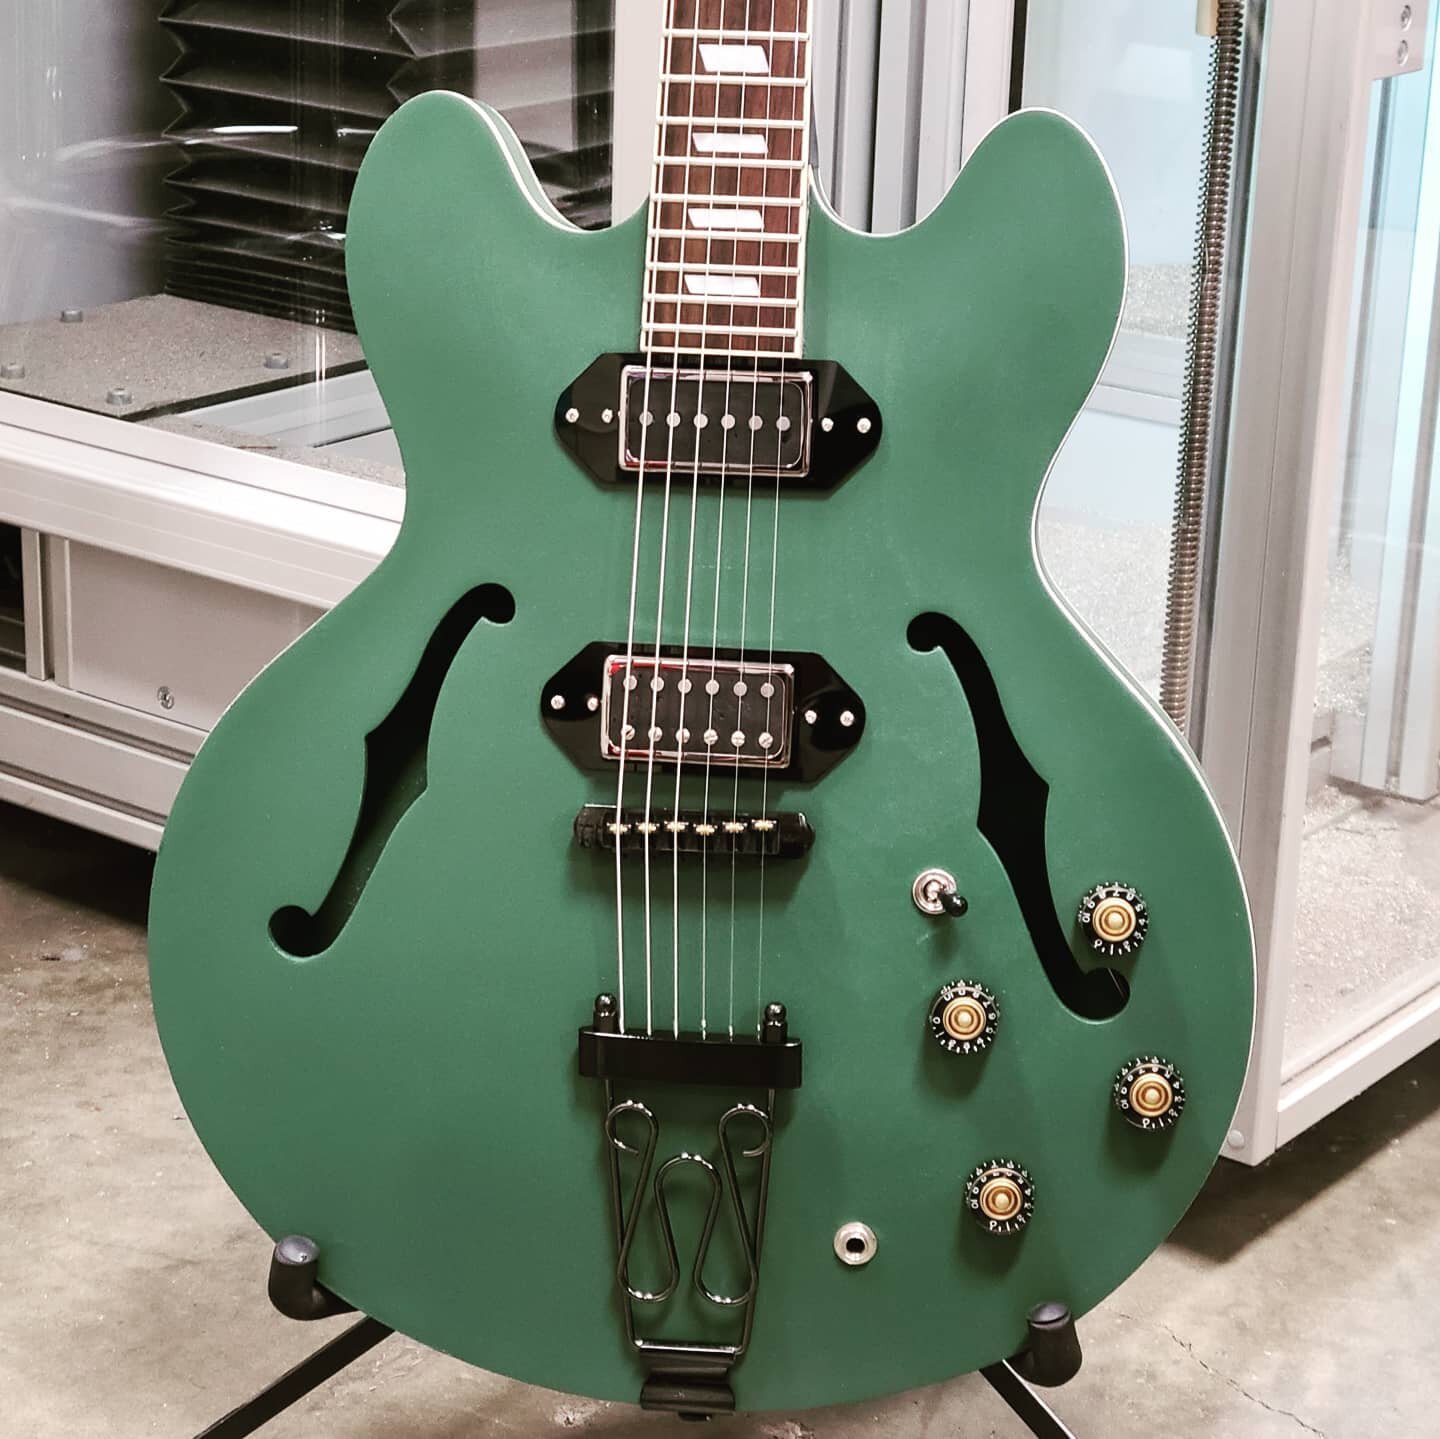 Custom Epiphone Casino Build - Our client bought this bare bones &quot;USED&quot; guitar. Painted it themselves. Brought us a pile of parts and high hopes. I spent the better part of a day routing, drilling, measuring... measuring again, laser cuttin